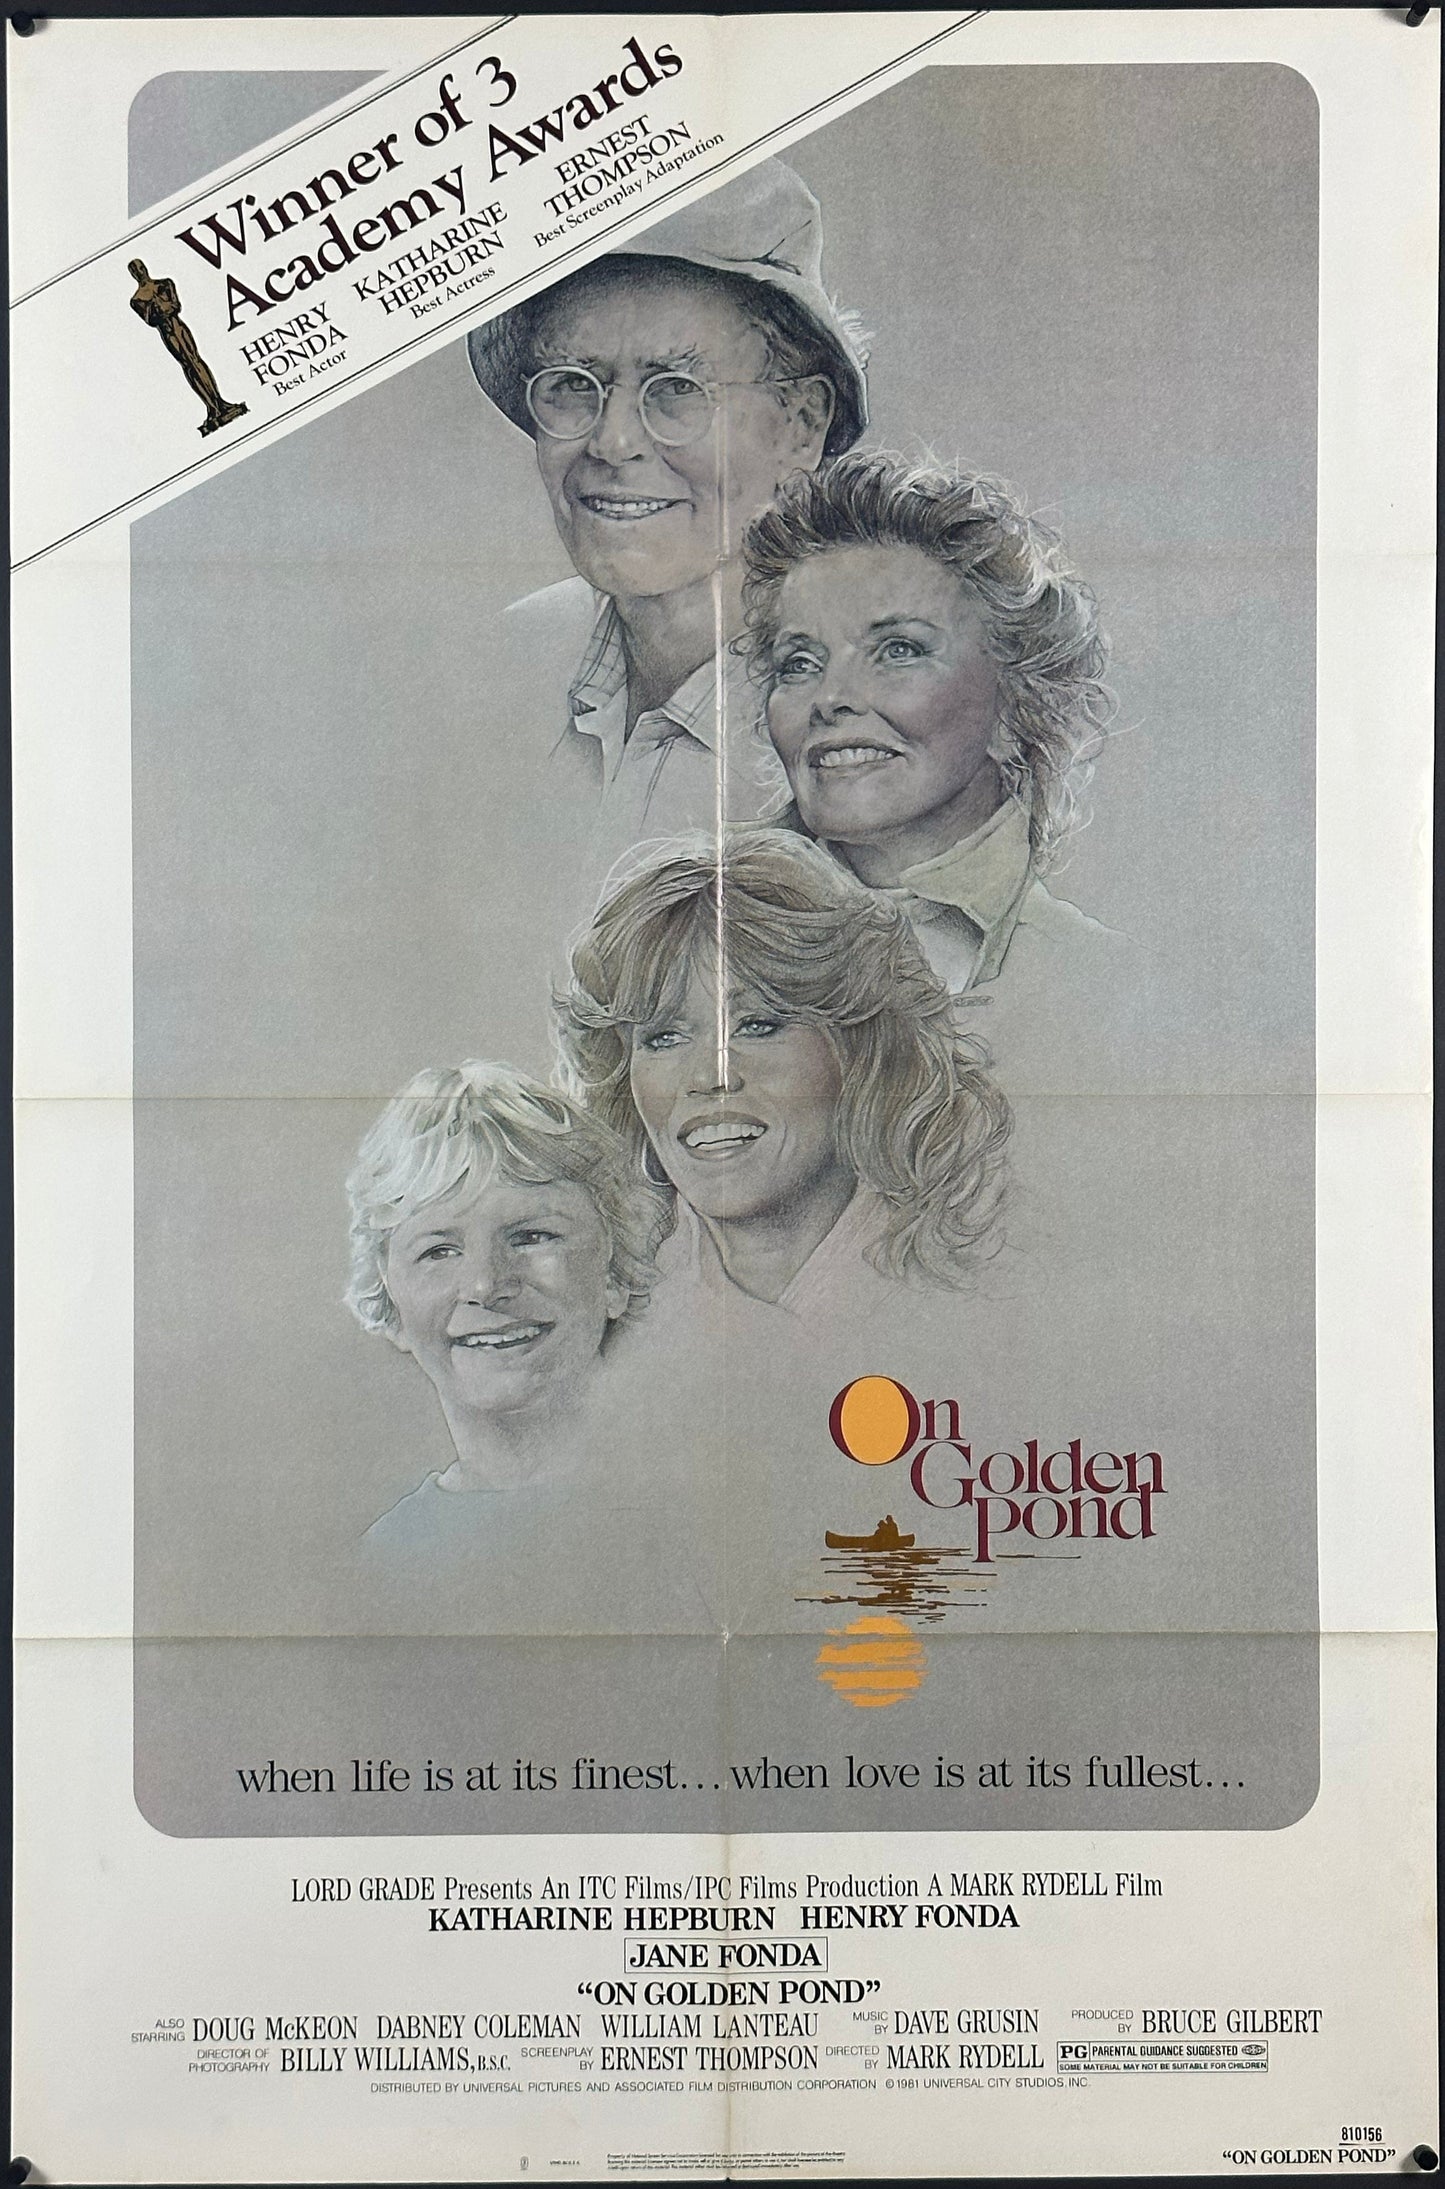 On Golden Pond - posterpalace.com